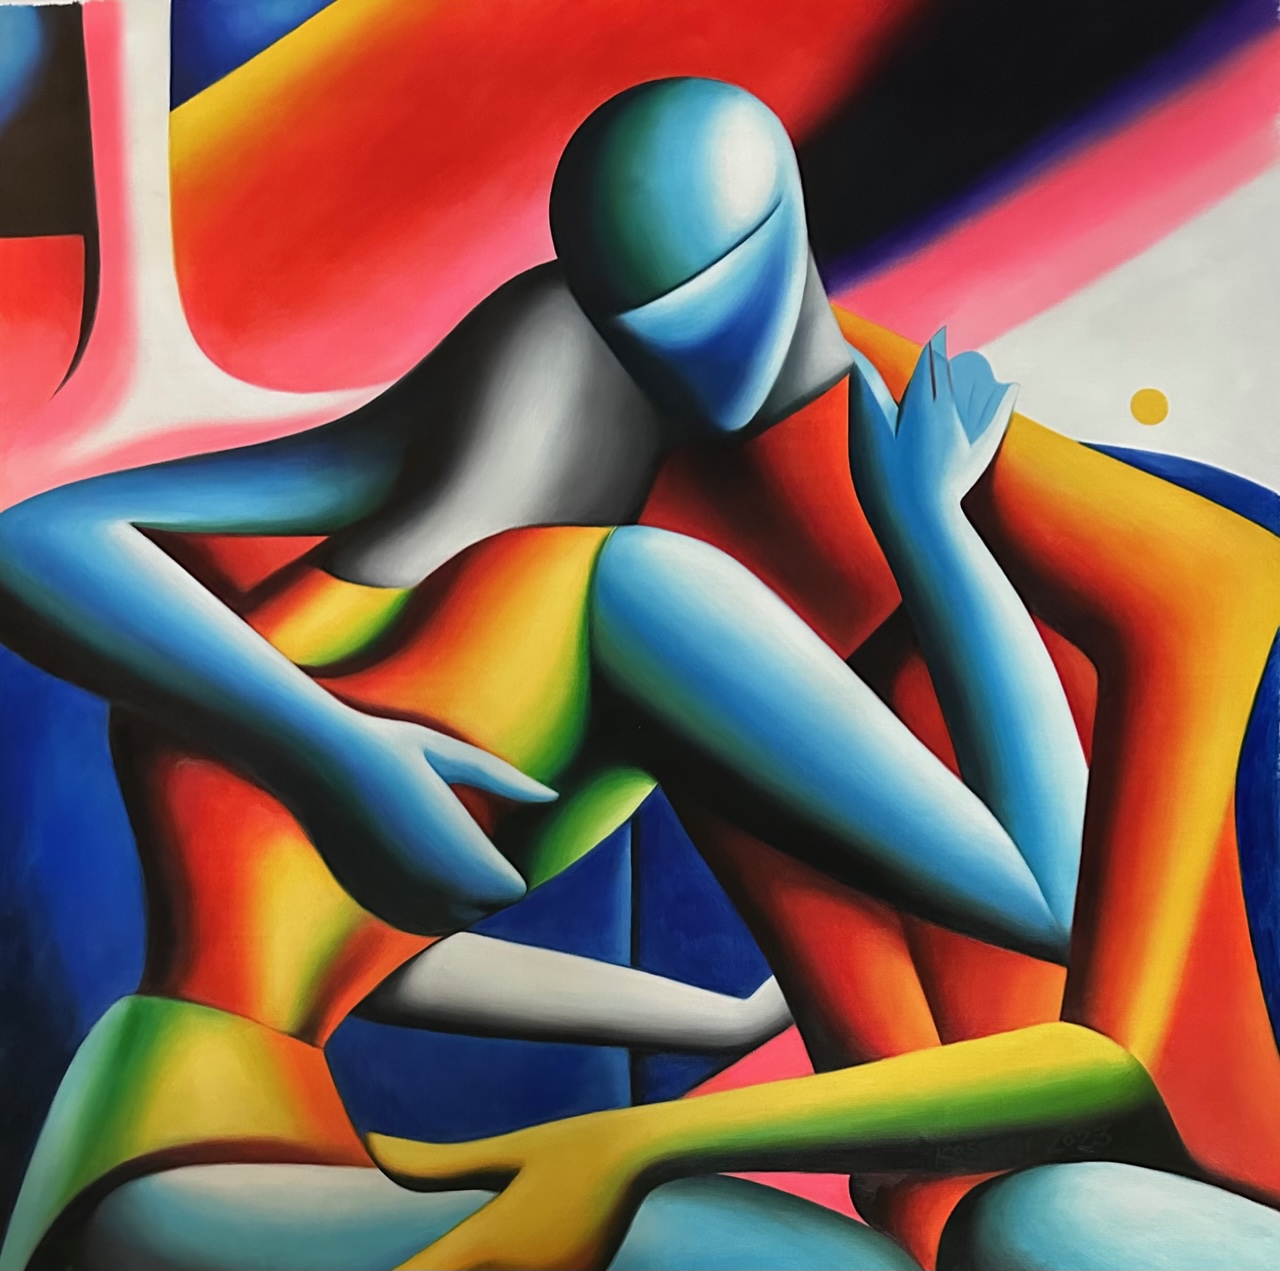 MARK KOSTABI - Chromatic Passion Theory - Oil on Canvas - 39x39 inches